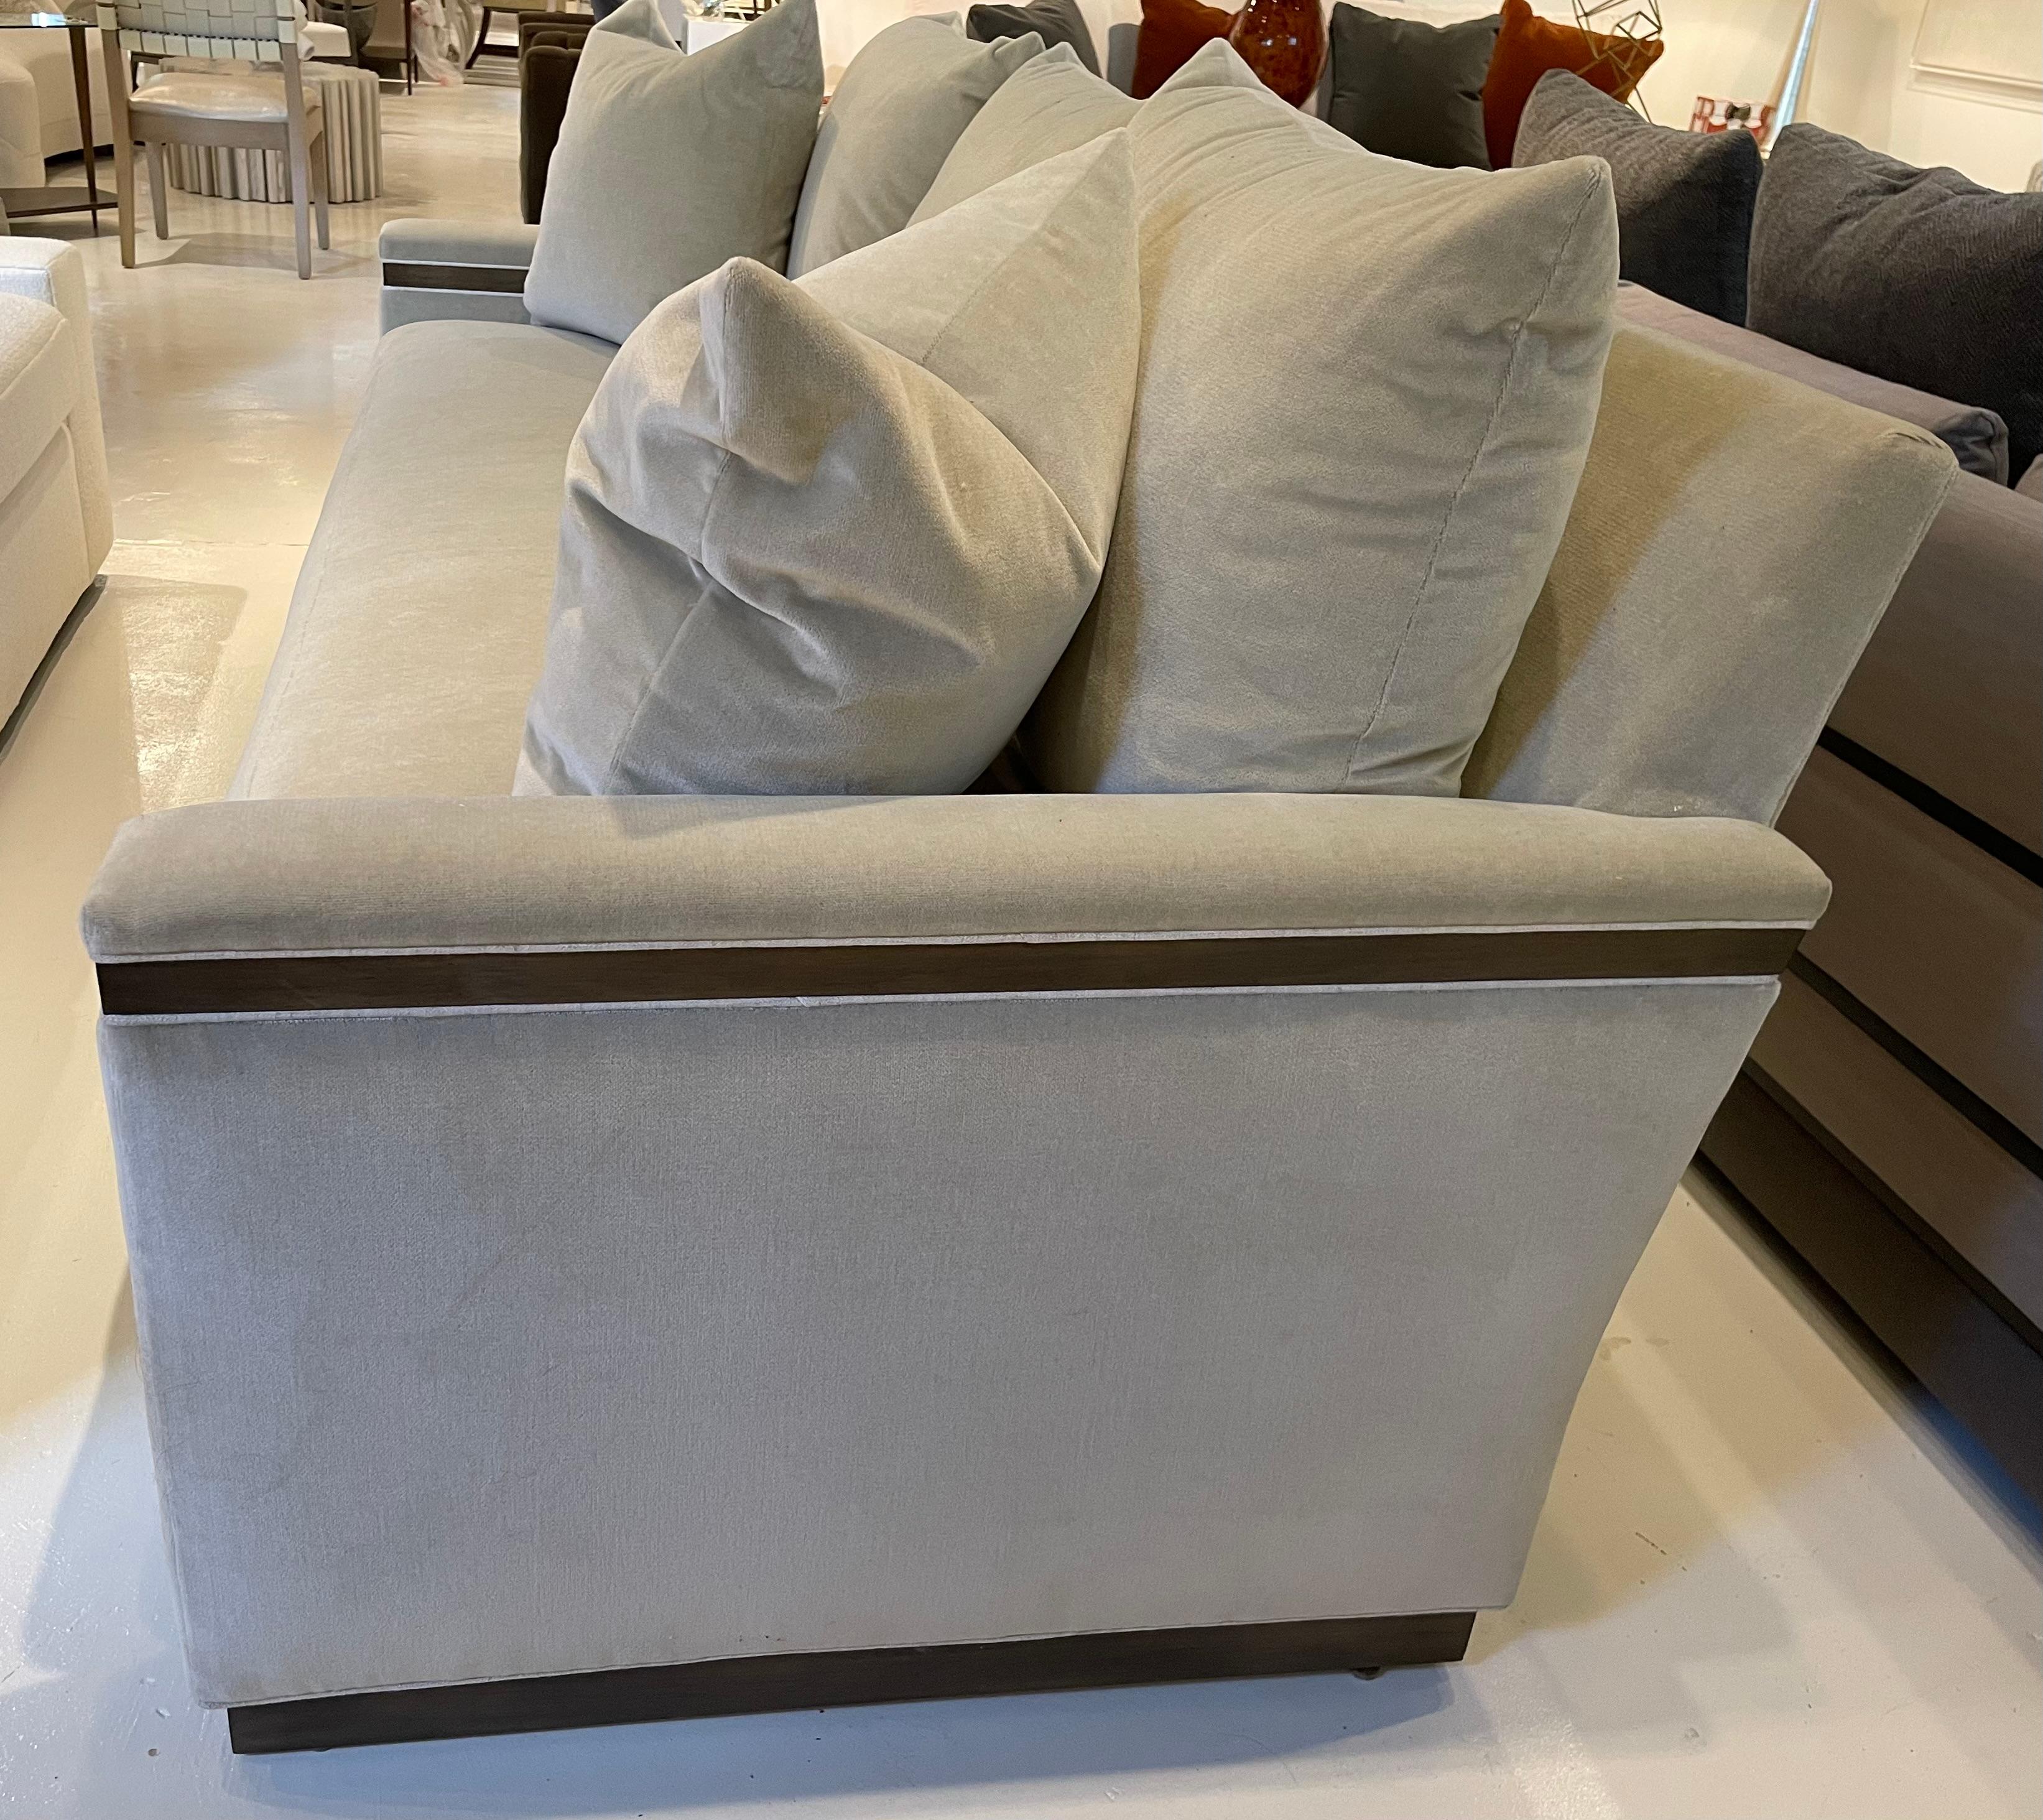 Vanguard Envision Sofa - Showroom New.  Covered in a rich, neutral, taupe, faux mohair velvet with a contrast welt.  The capped arm is trimmed in wood detail.  The sofa has a spring down bench seat and a plinth base.  8-way hand tied seat